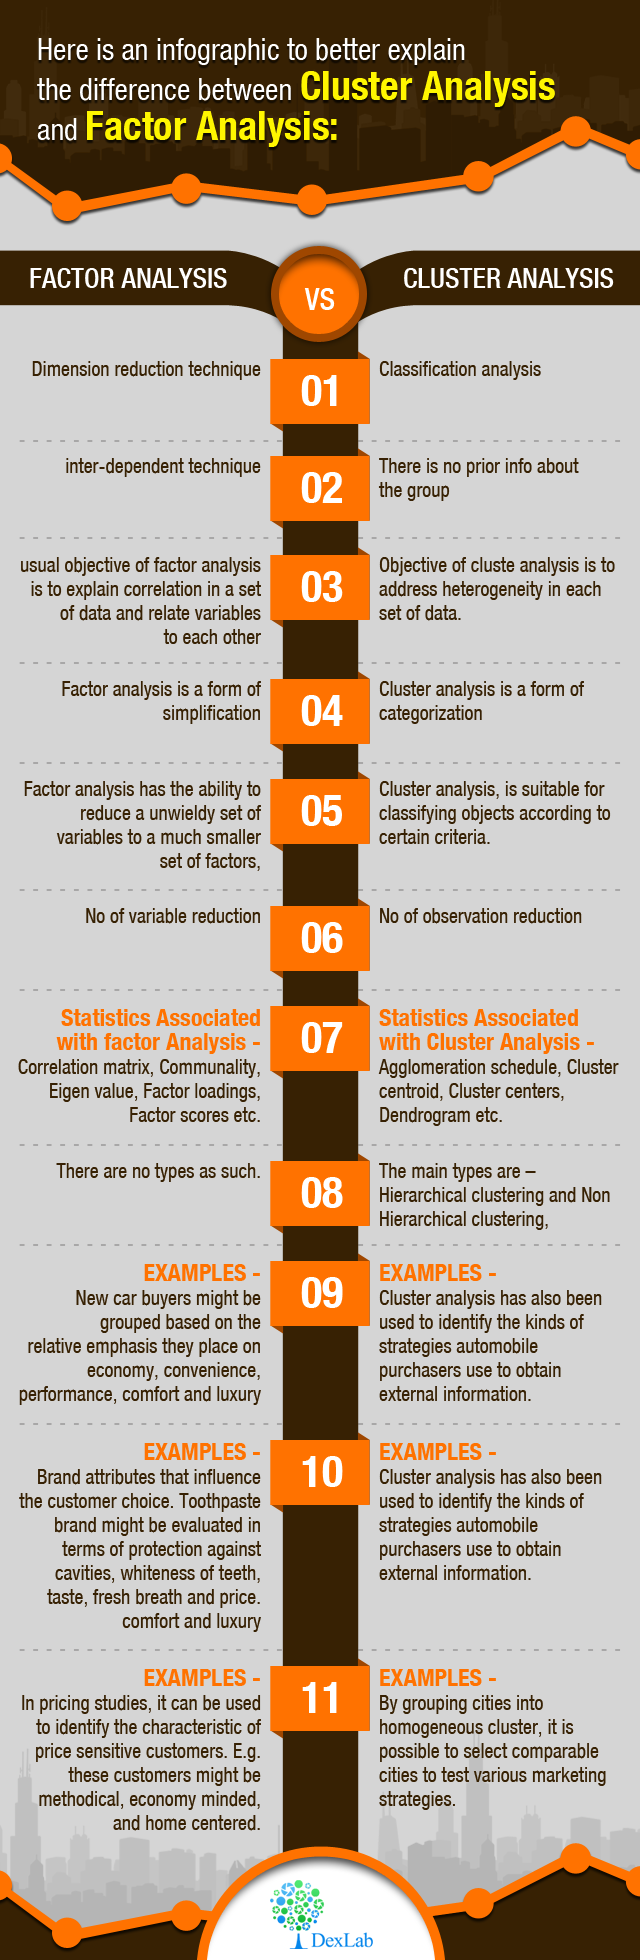 Here is an infographic to better explain the difference between cluster analysis and factor analysis: